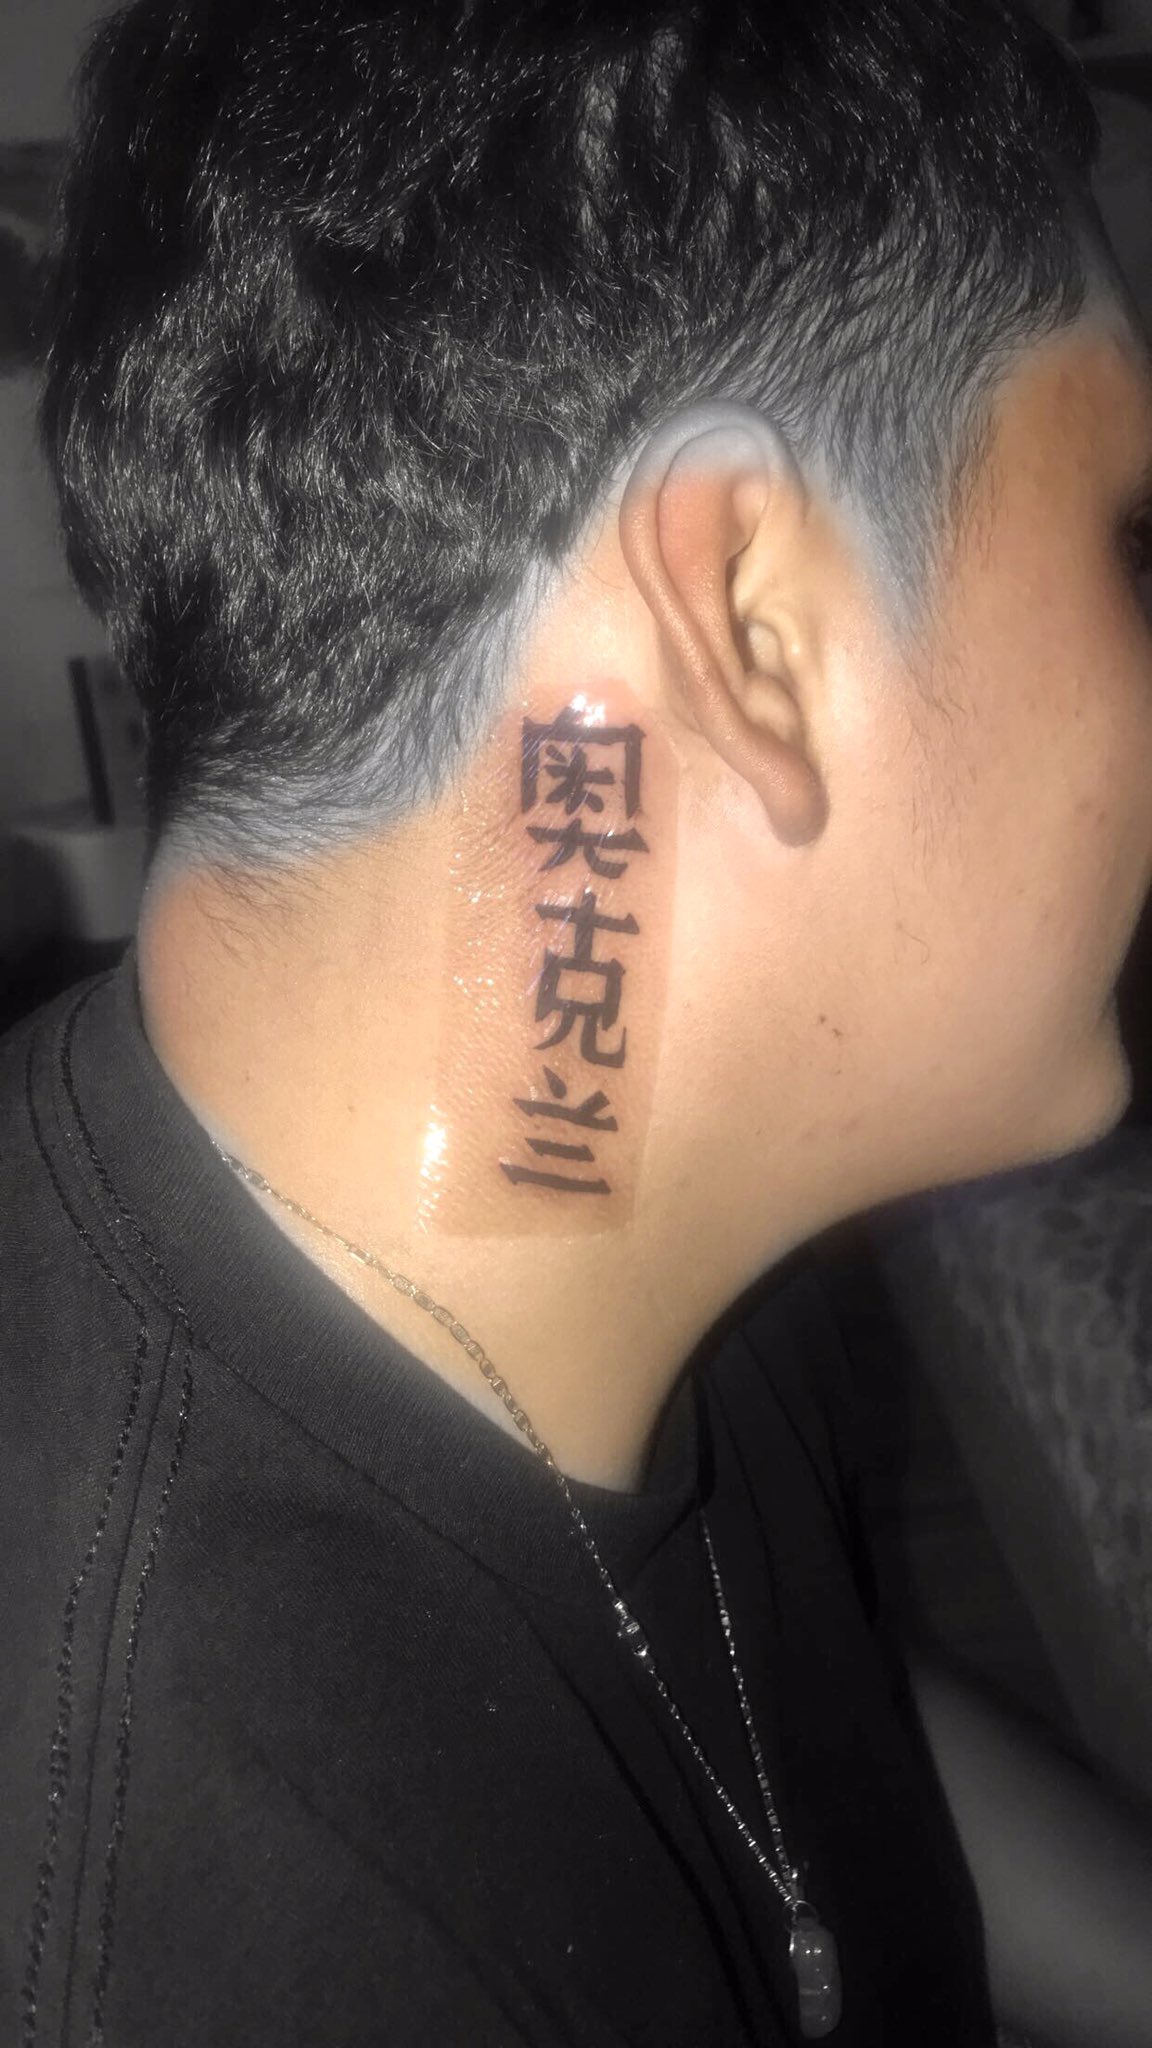 Native Chinese or Japanese: how often do foreigners who get tattoos of  hanzi/kanji actually have incomprehensible, offensive, or lame things on  them? - Quora